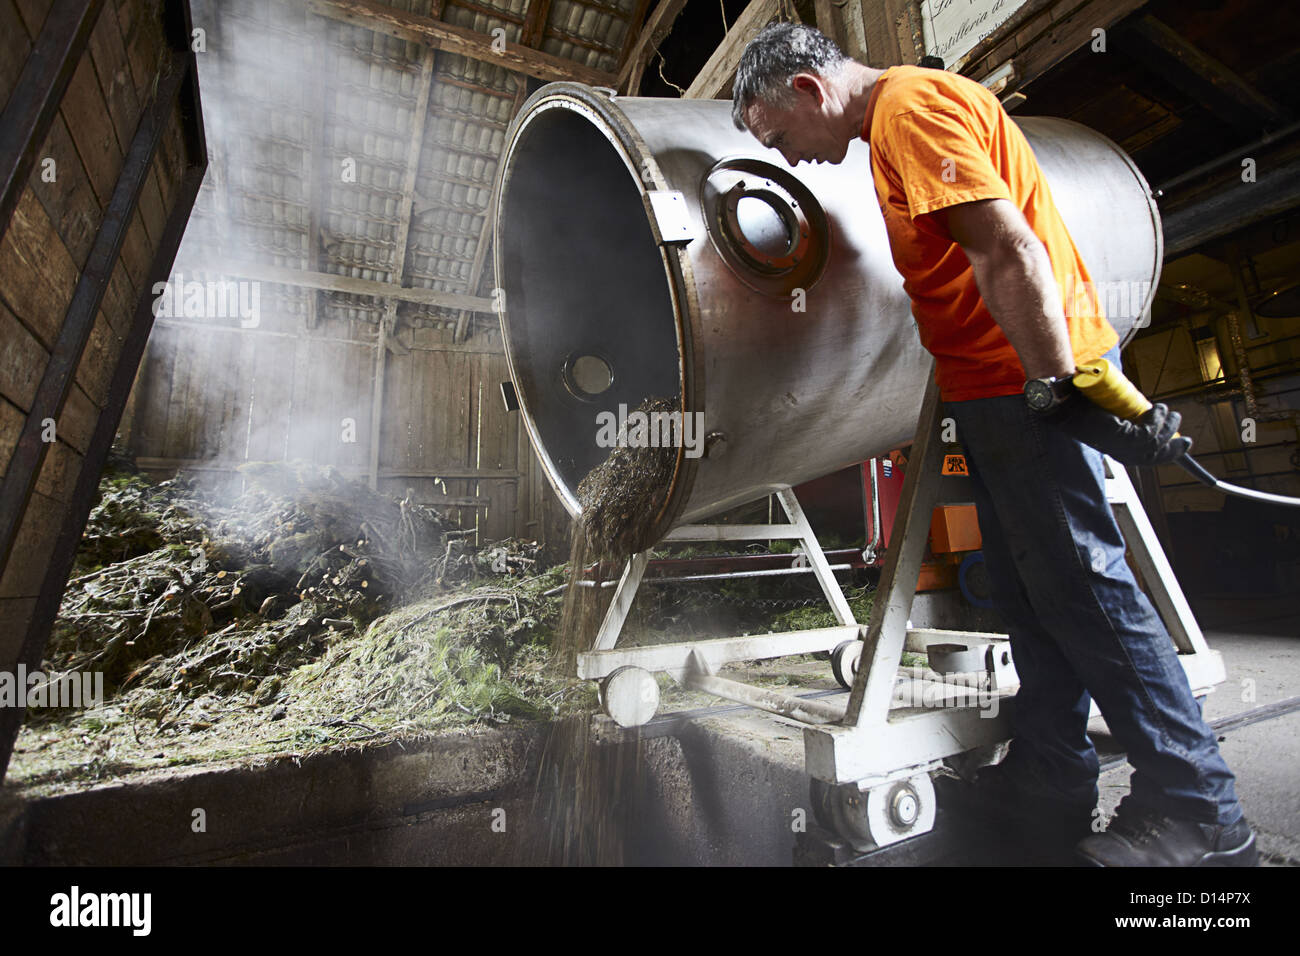 Worker pouring mixture from vat in shop Stock Photo